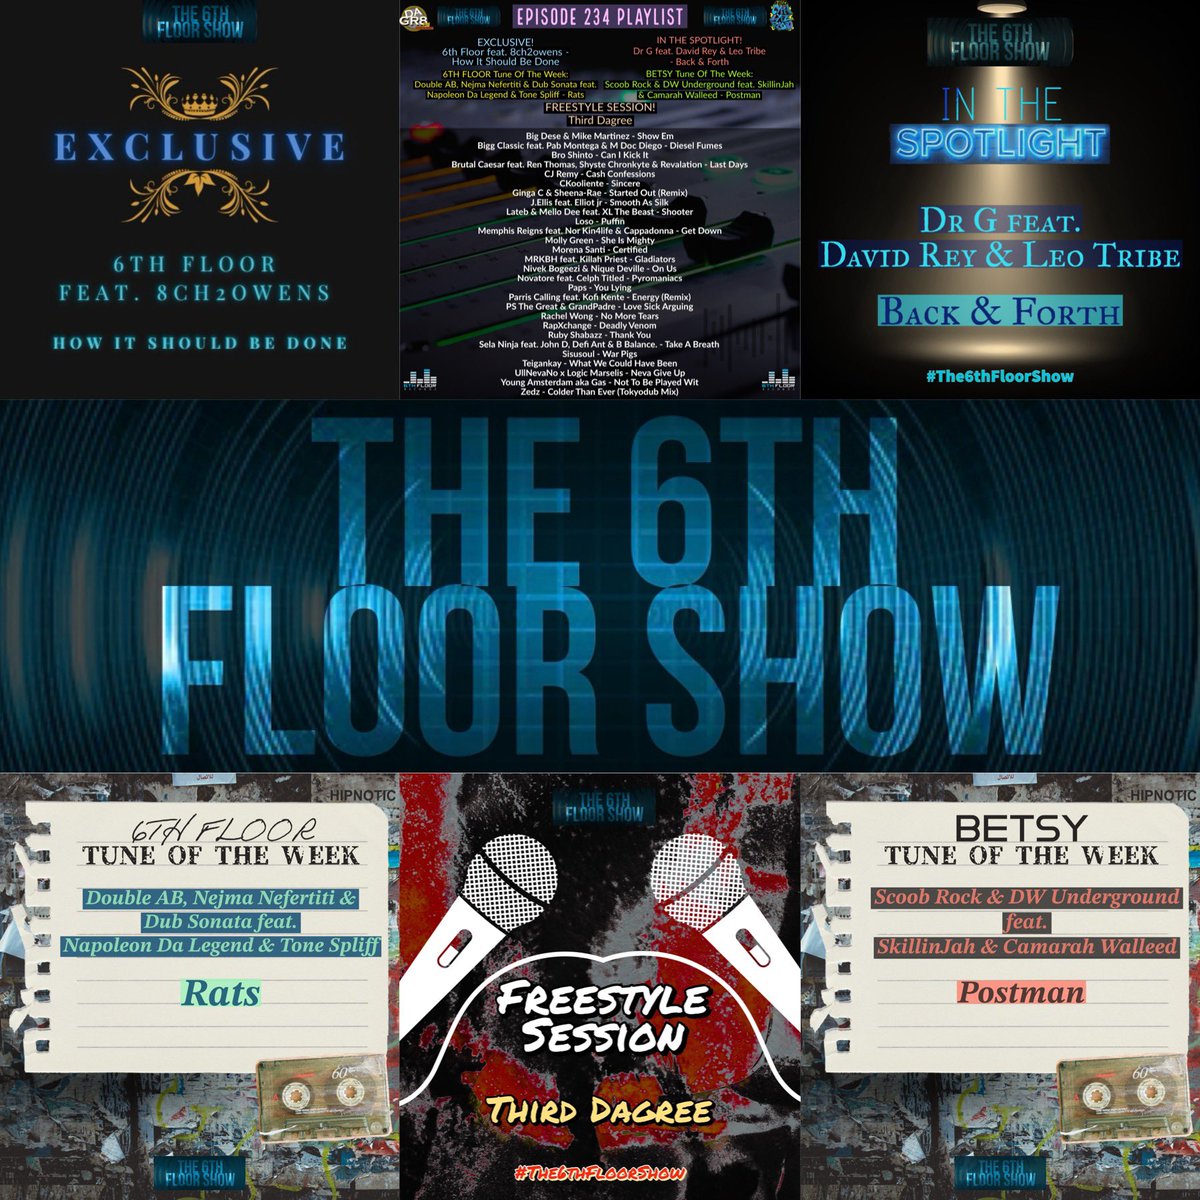 Episode 234 #OutNow #The6thFloorShow podcasts.apple.com/gb/podcast/the… music.amazon.co.uk/podcasts/cde4a… mediafire.com/file/m5pufshzw… audiomack.com/the-6th-floor-… deezer.page.link/56QBw4wUwxMVuC…